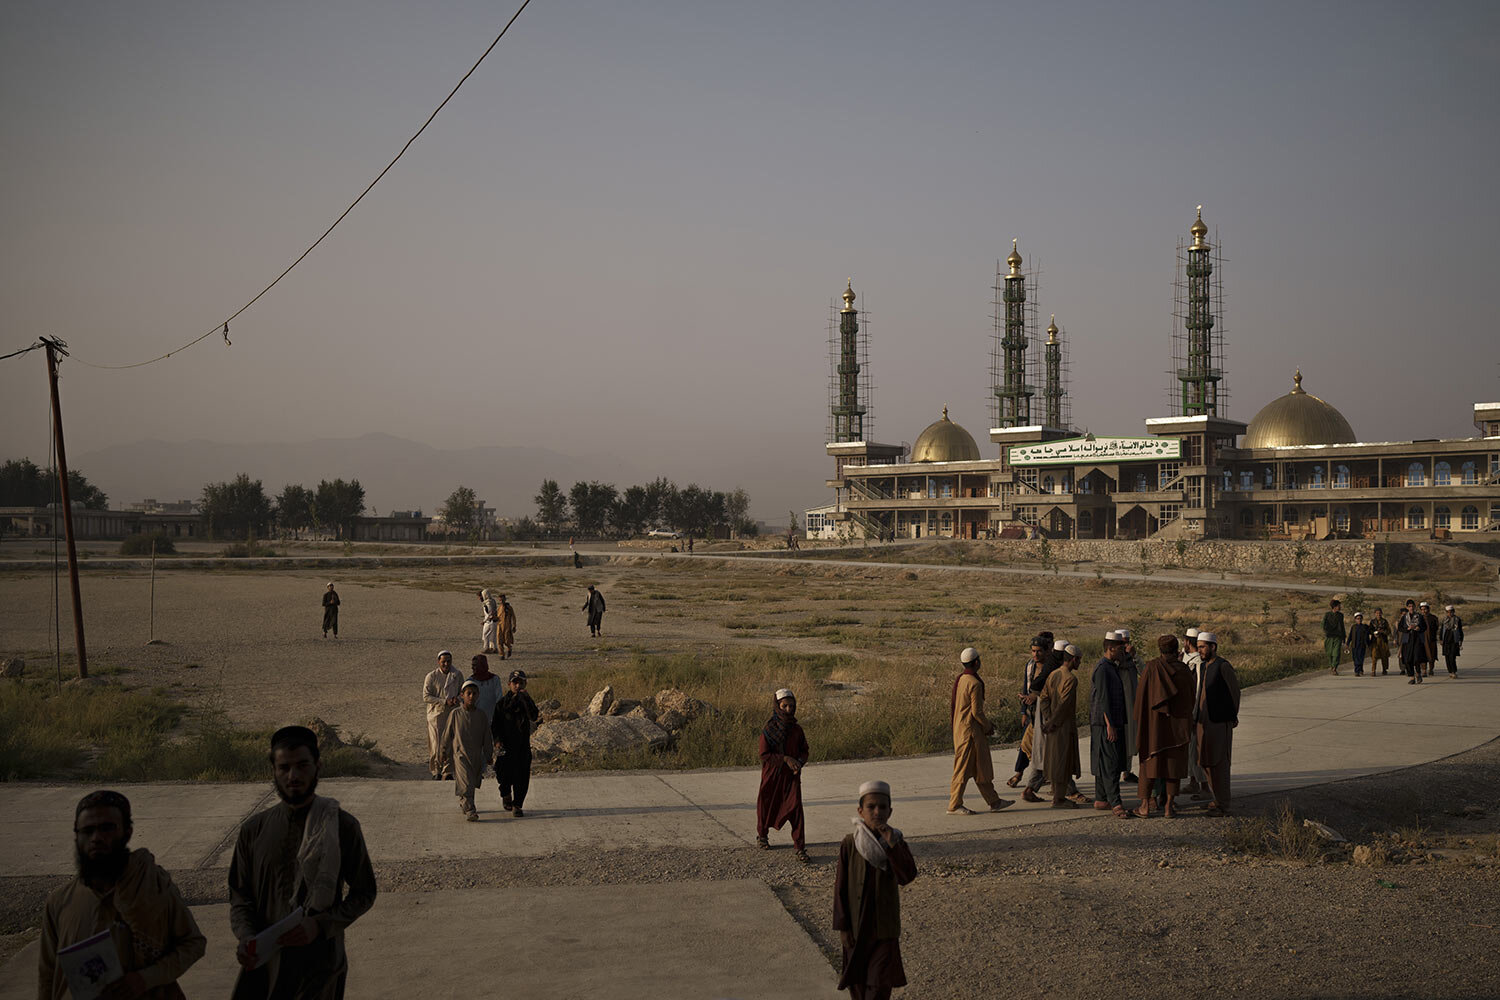 Afghan students walk out of the mosque at the Khatamul Anbiya madrasa after morning prayers in Kabul, Afghanistan, Wednesday, Sept. 29, 2021. (AP Photo/Felipe Dana)